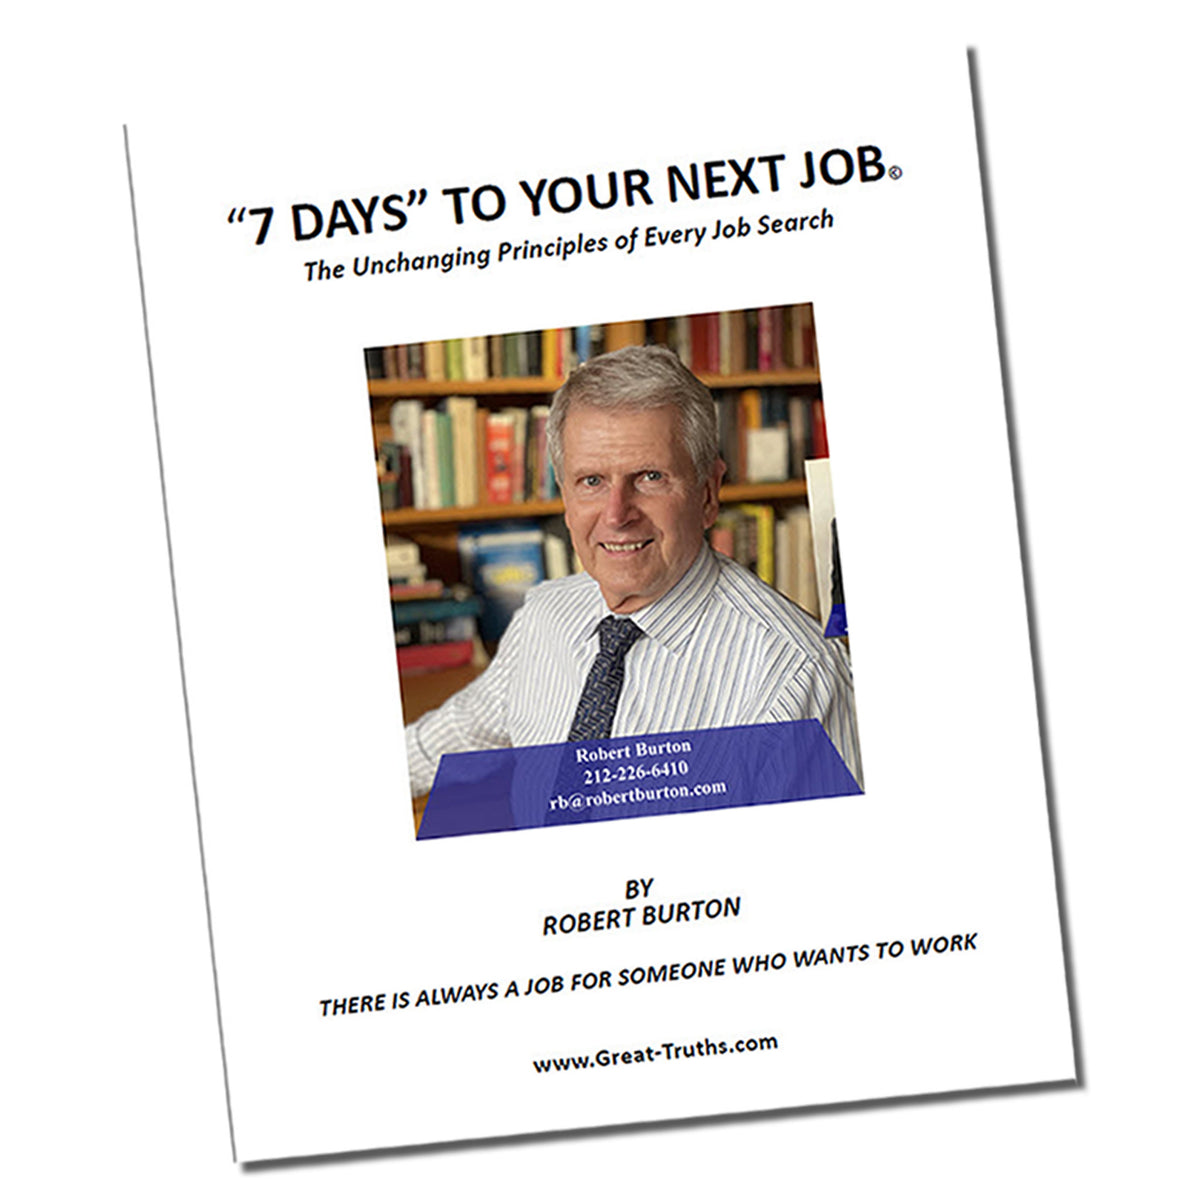 7 Days to Your Next Job© - Instant download E-Book